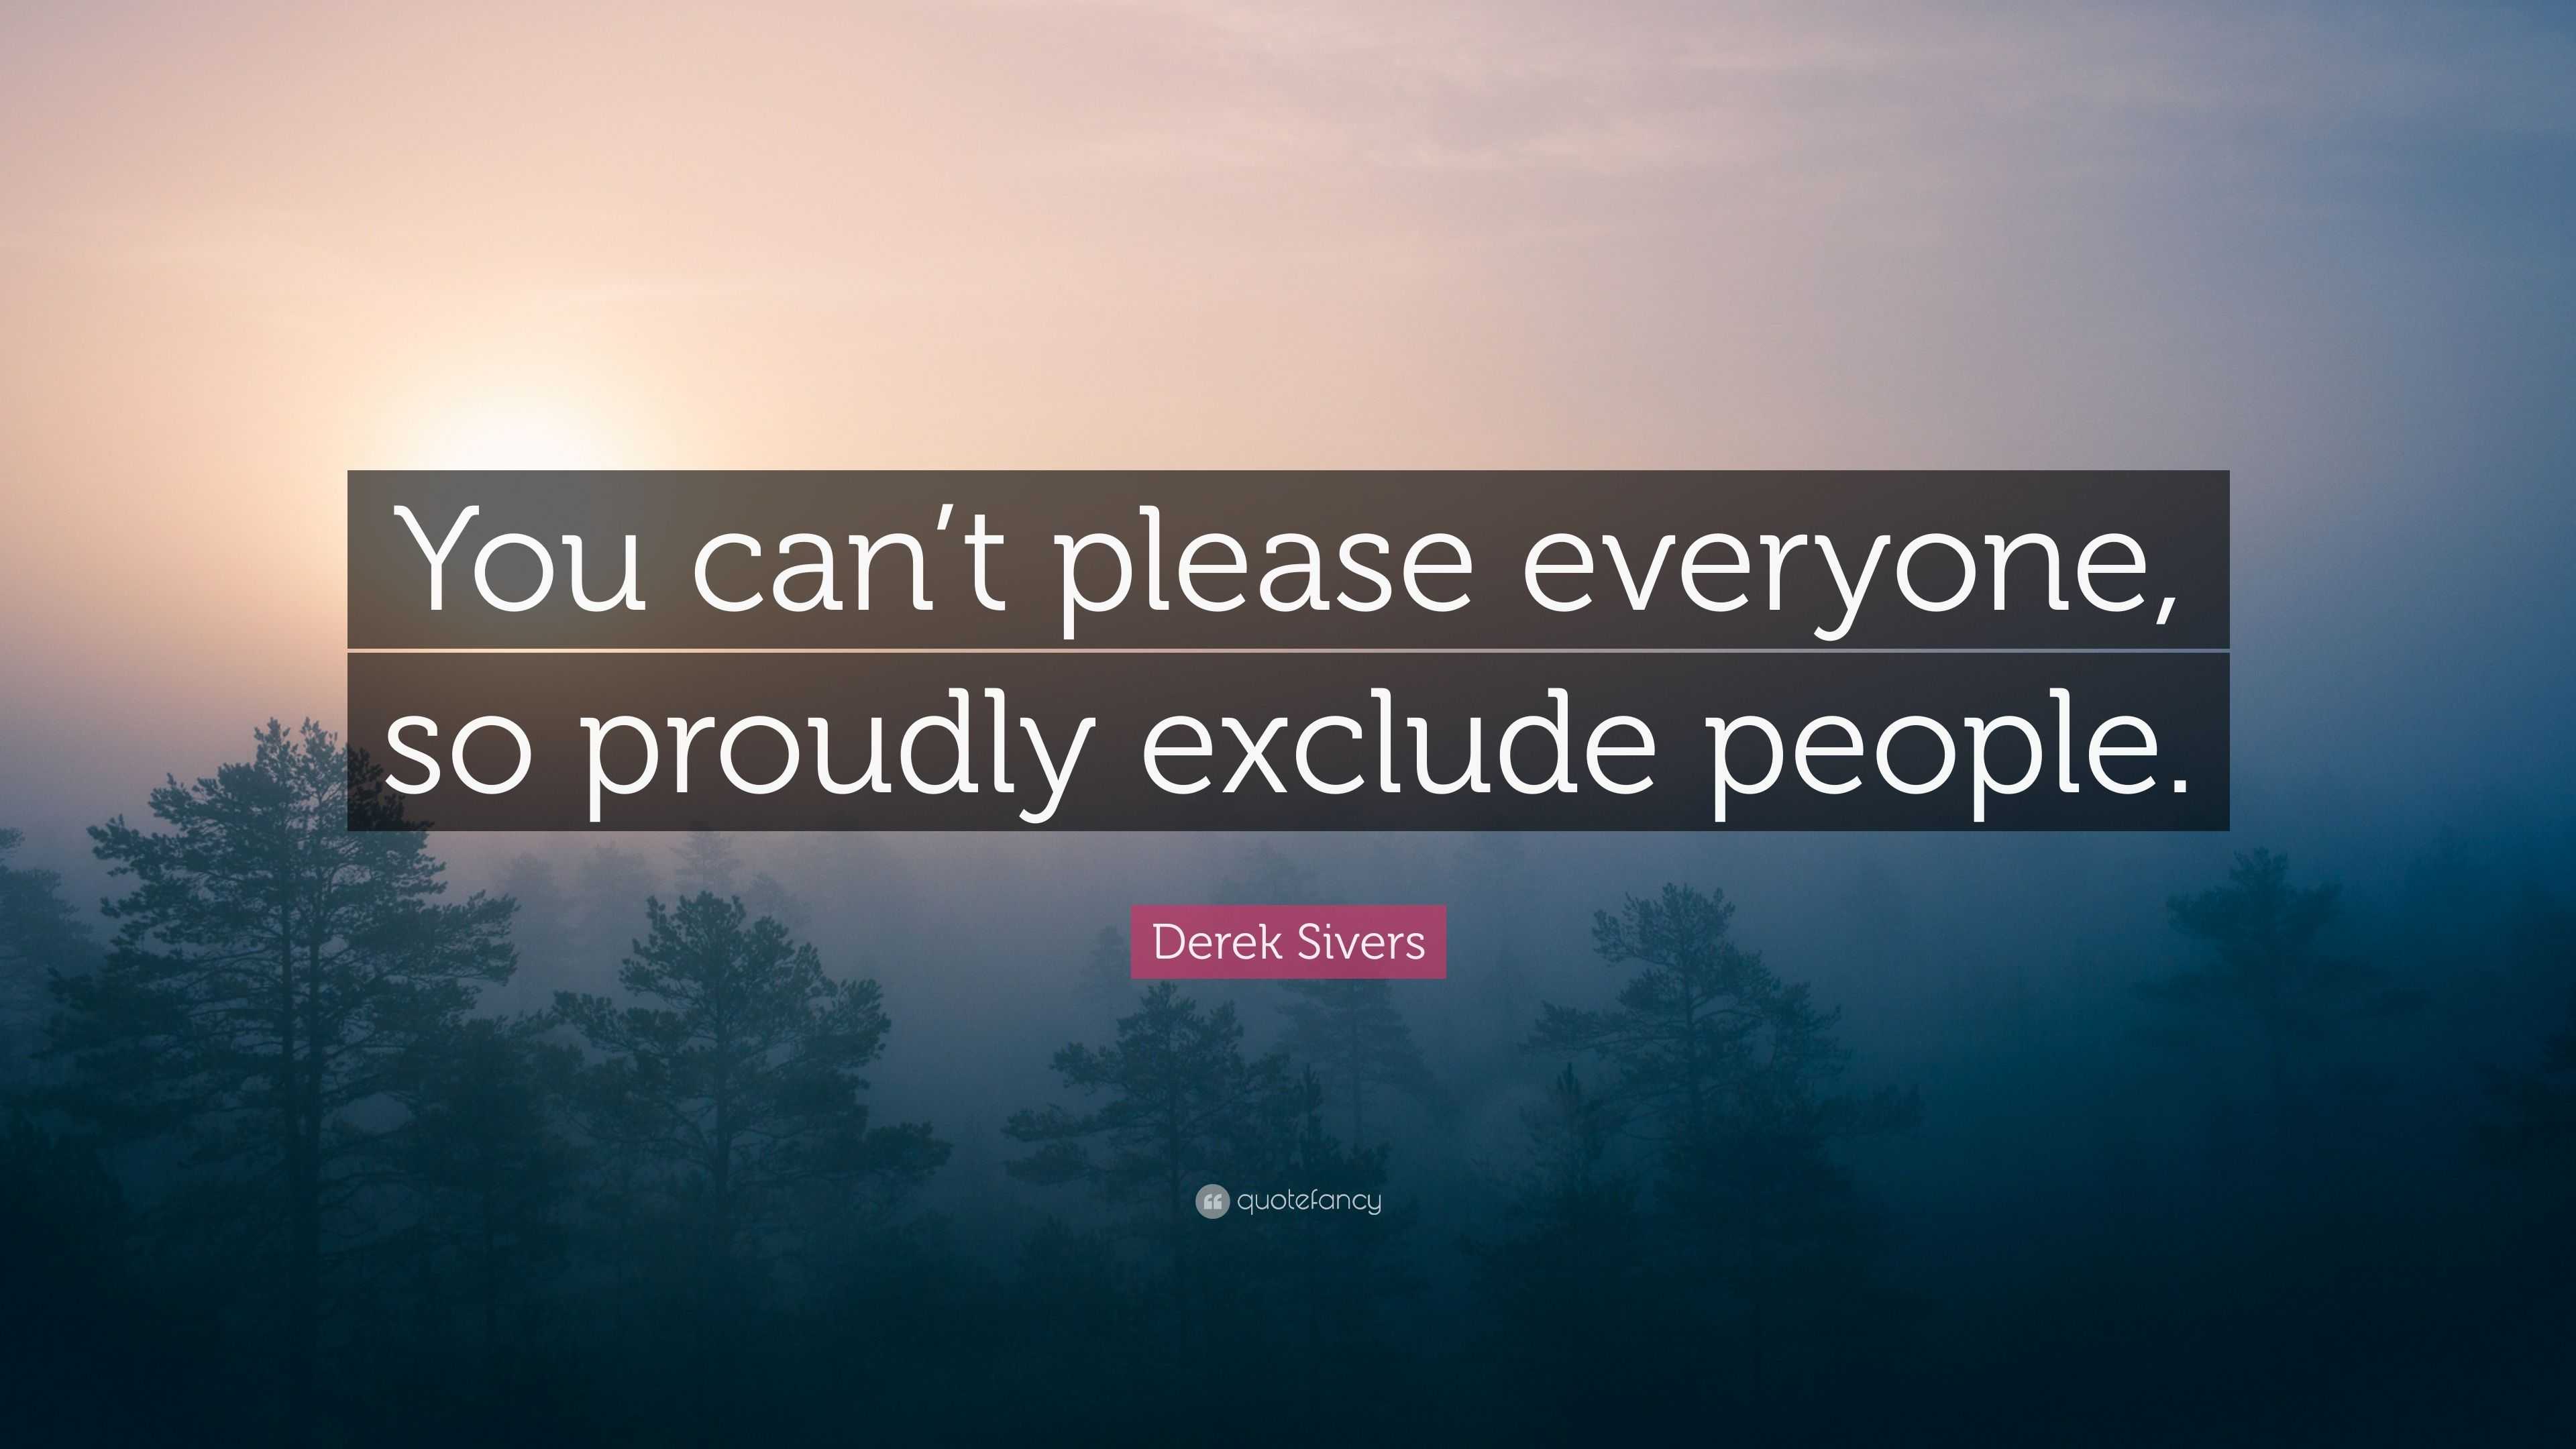 Derek Sivers Quote: “You can't please everyone, so proudly exclude people.”